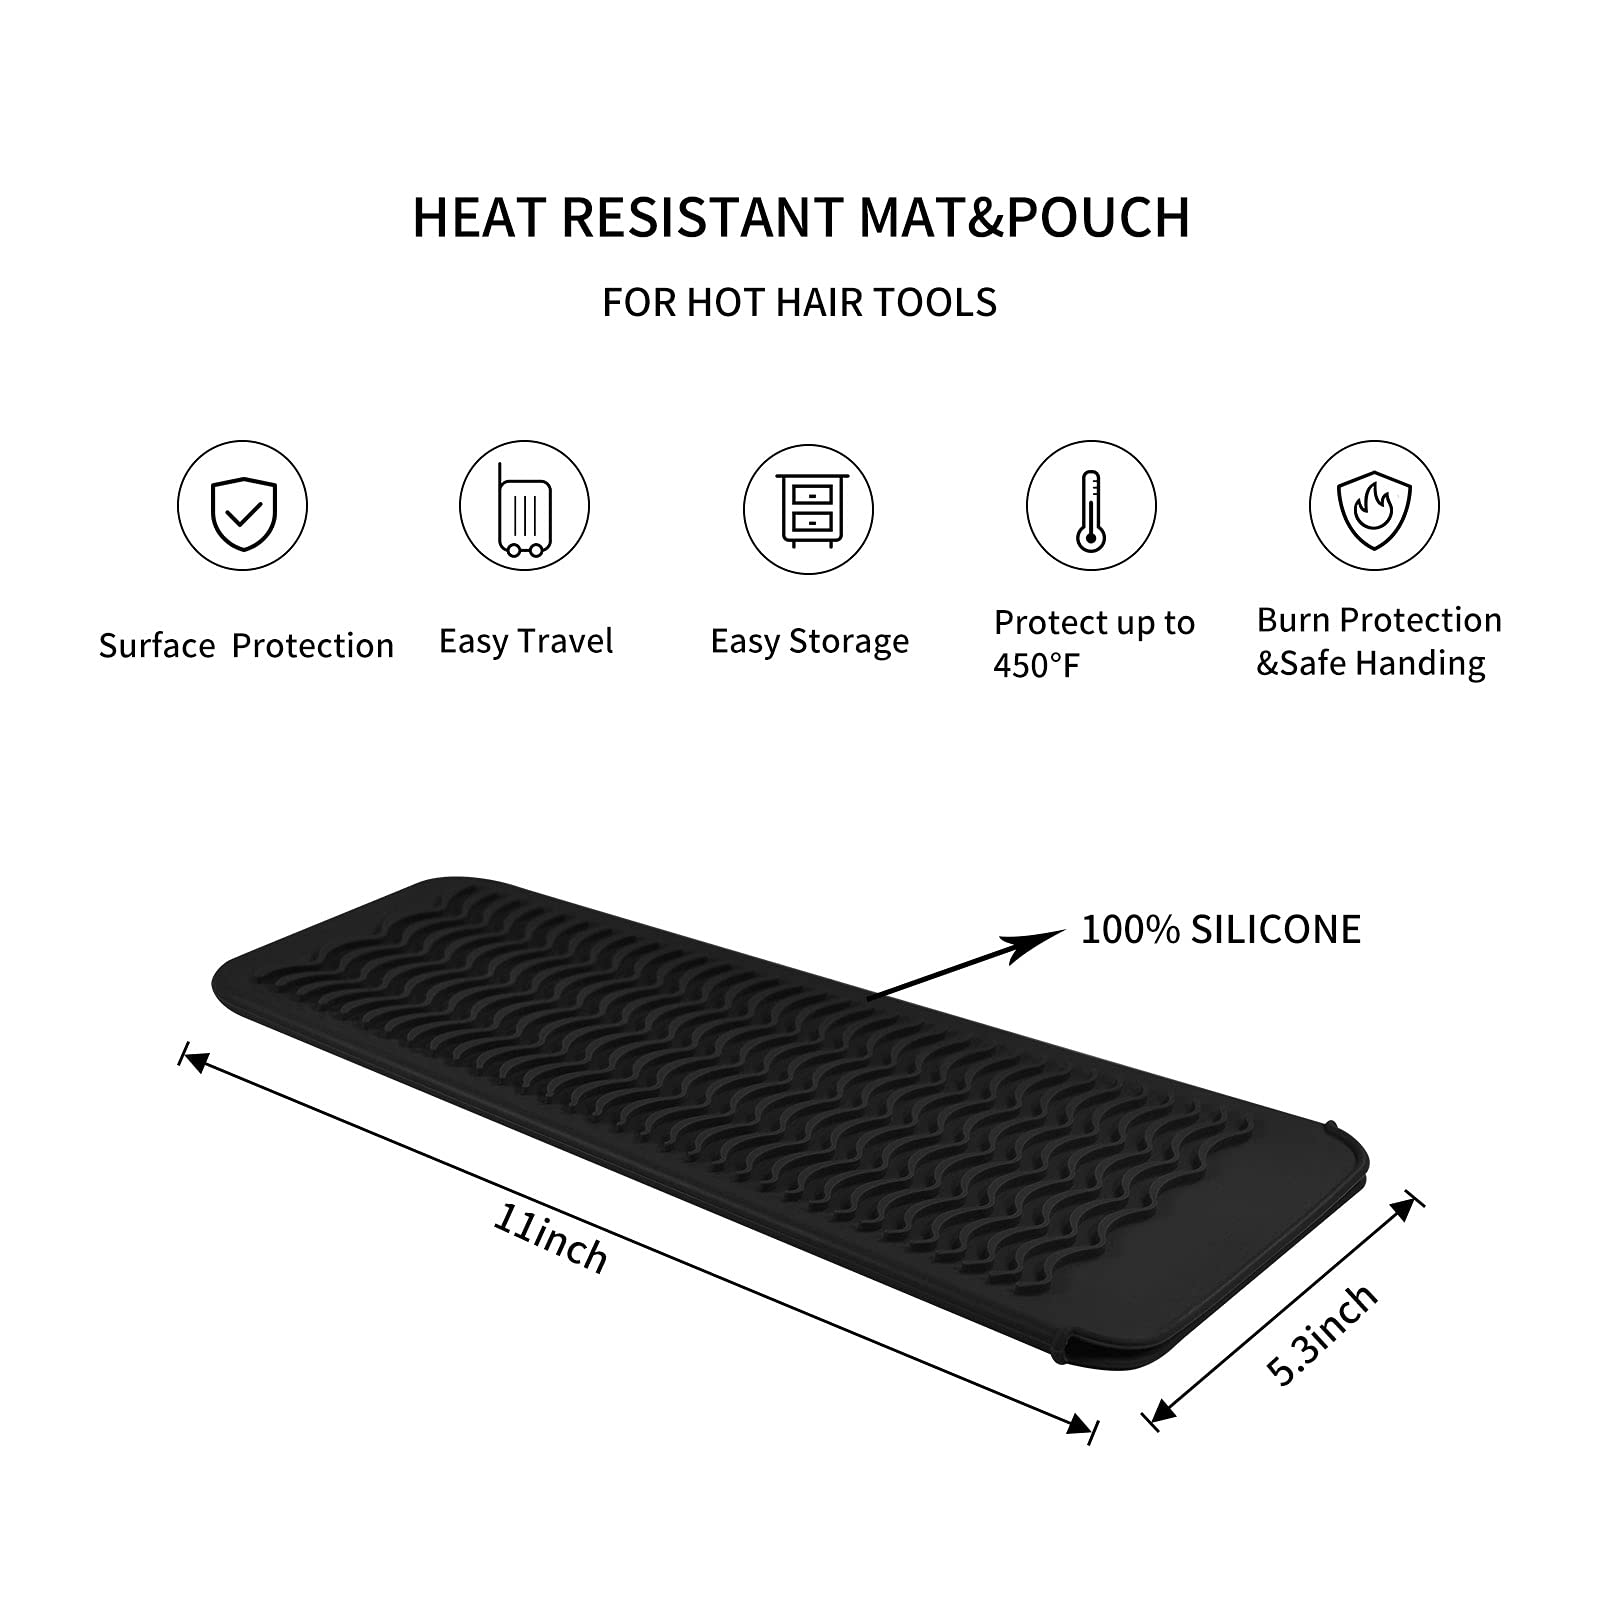 EIOKIT Silicone Heat Resistant Travel Mat Pouch for Hair Straightener,Crimping , Hair Curling Wand,Flat /Hair Waving Iron and Hot Hair Styling Tools (Black)